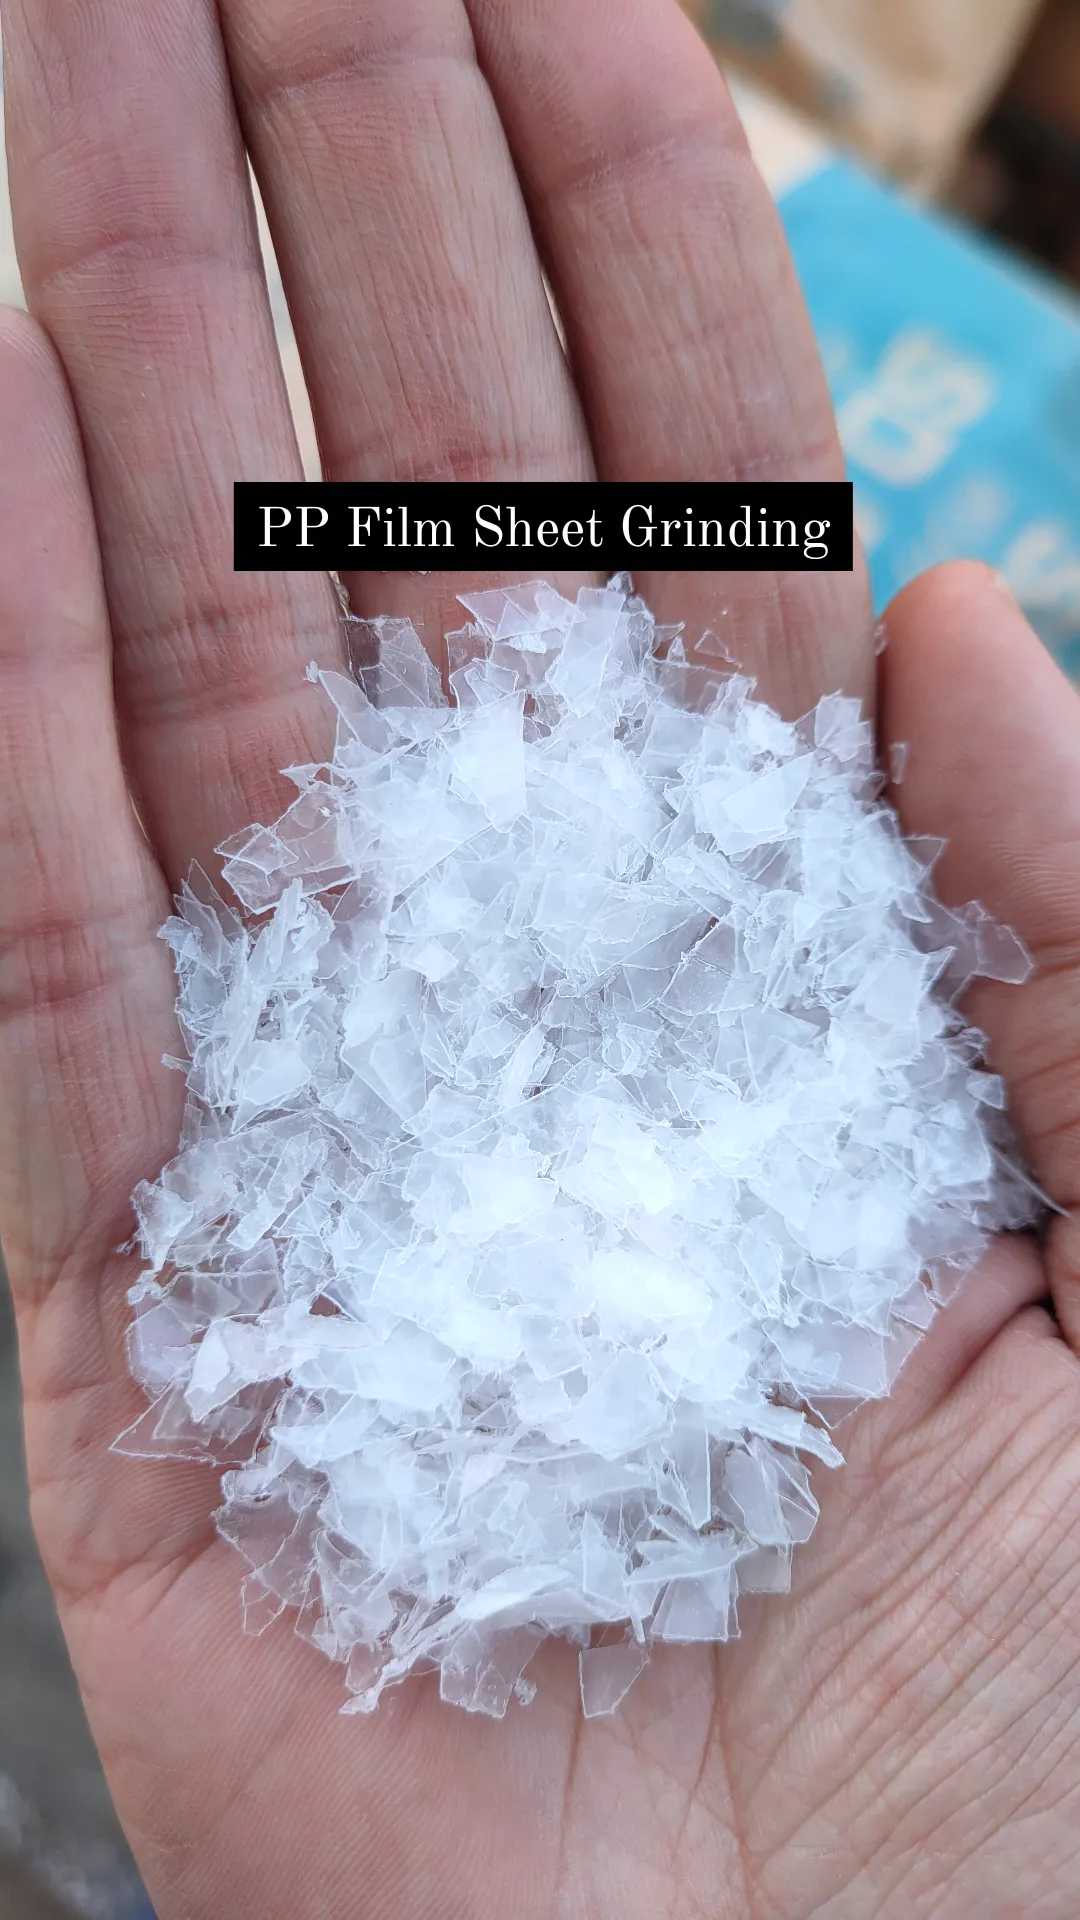 NATURAL PP FILM SHEET GRINDING PP Grinding Injection Molding mxmxq  india Plastic4trade